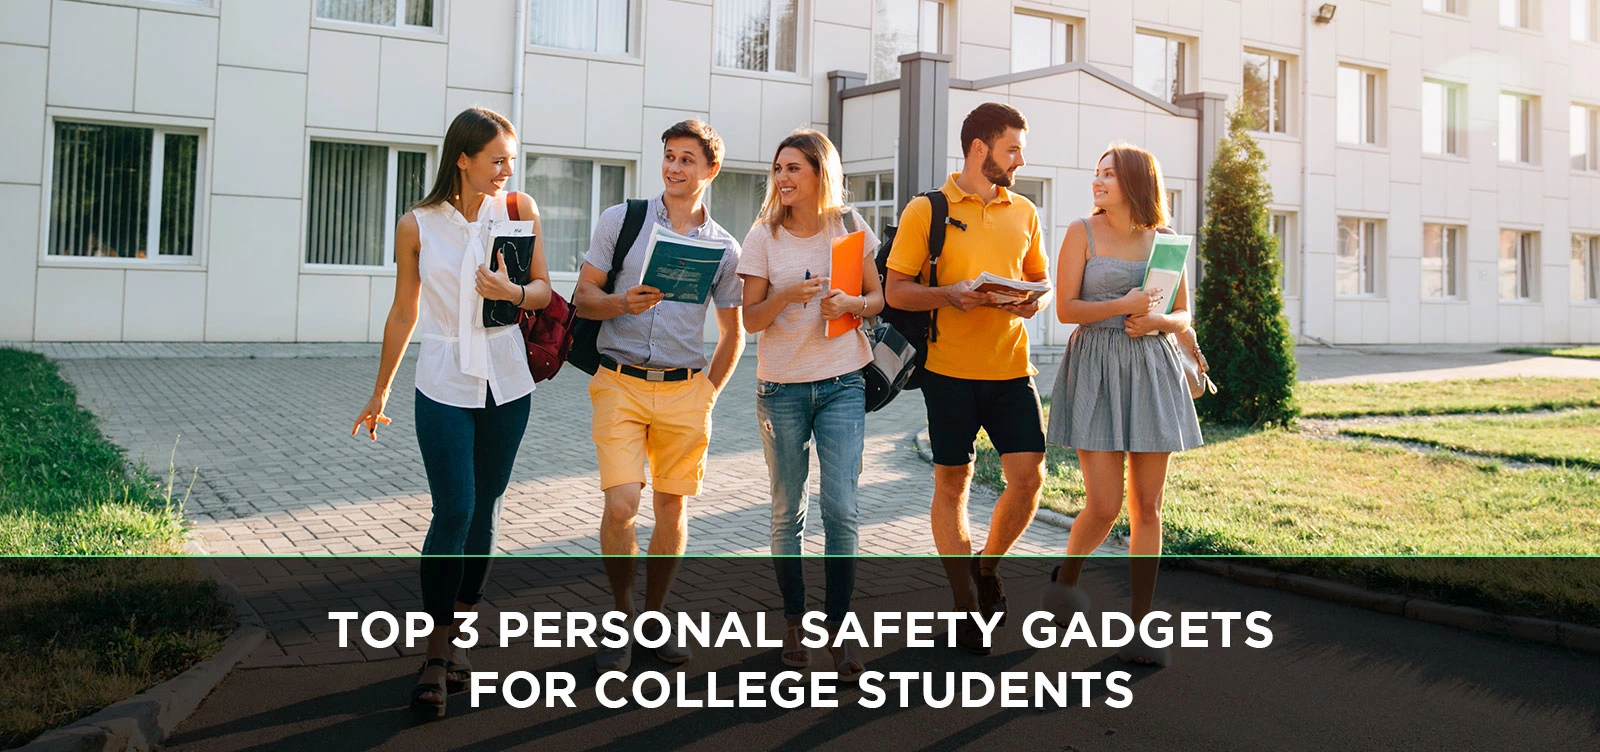 Top 3 Personal Safety Gadgets for College Students